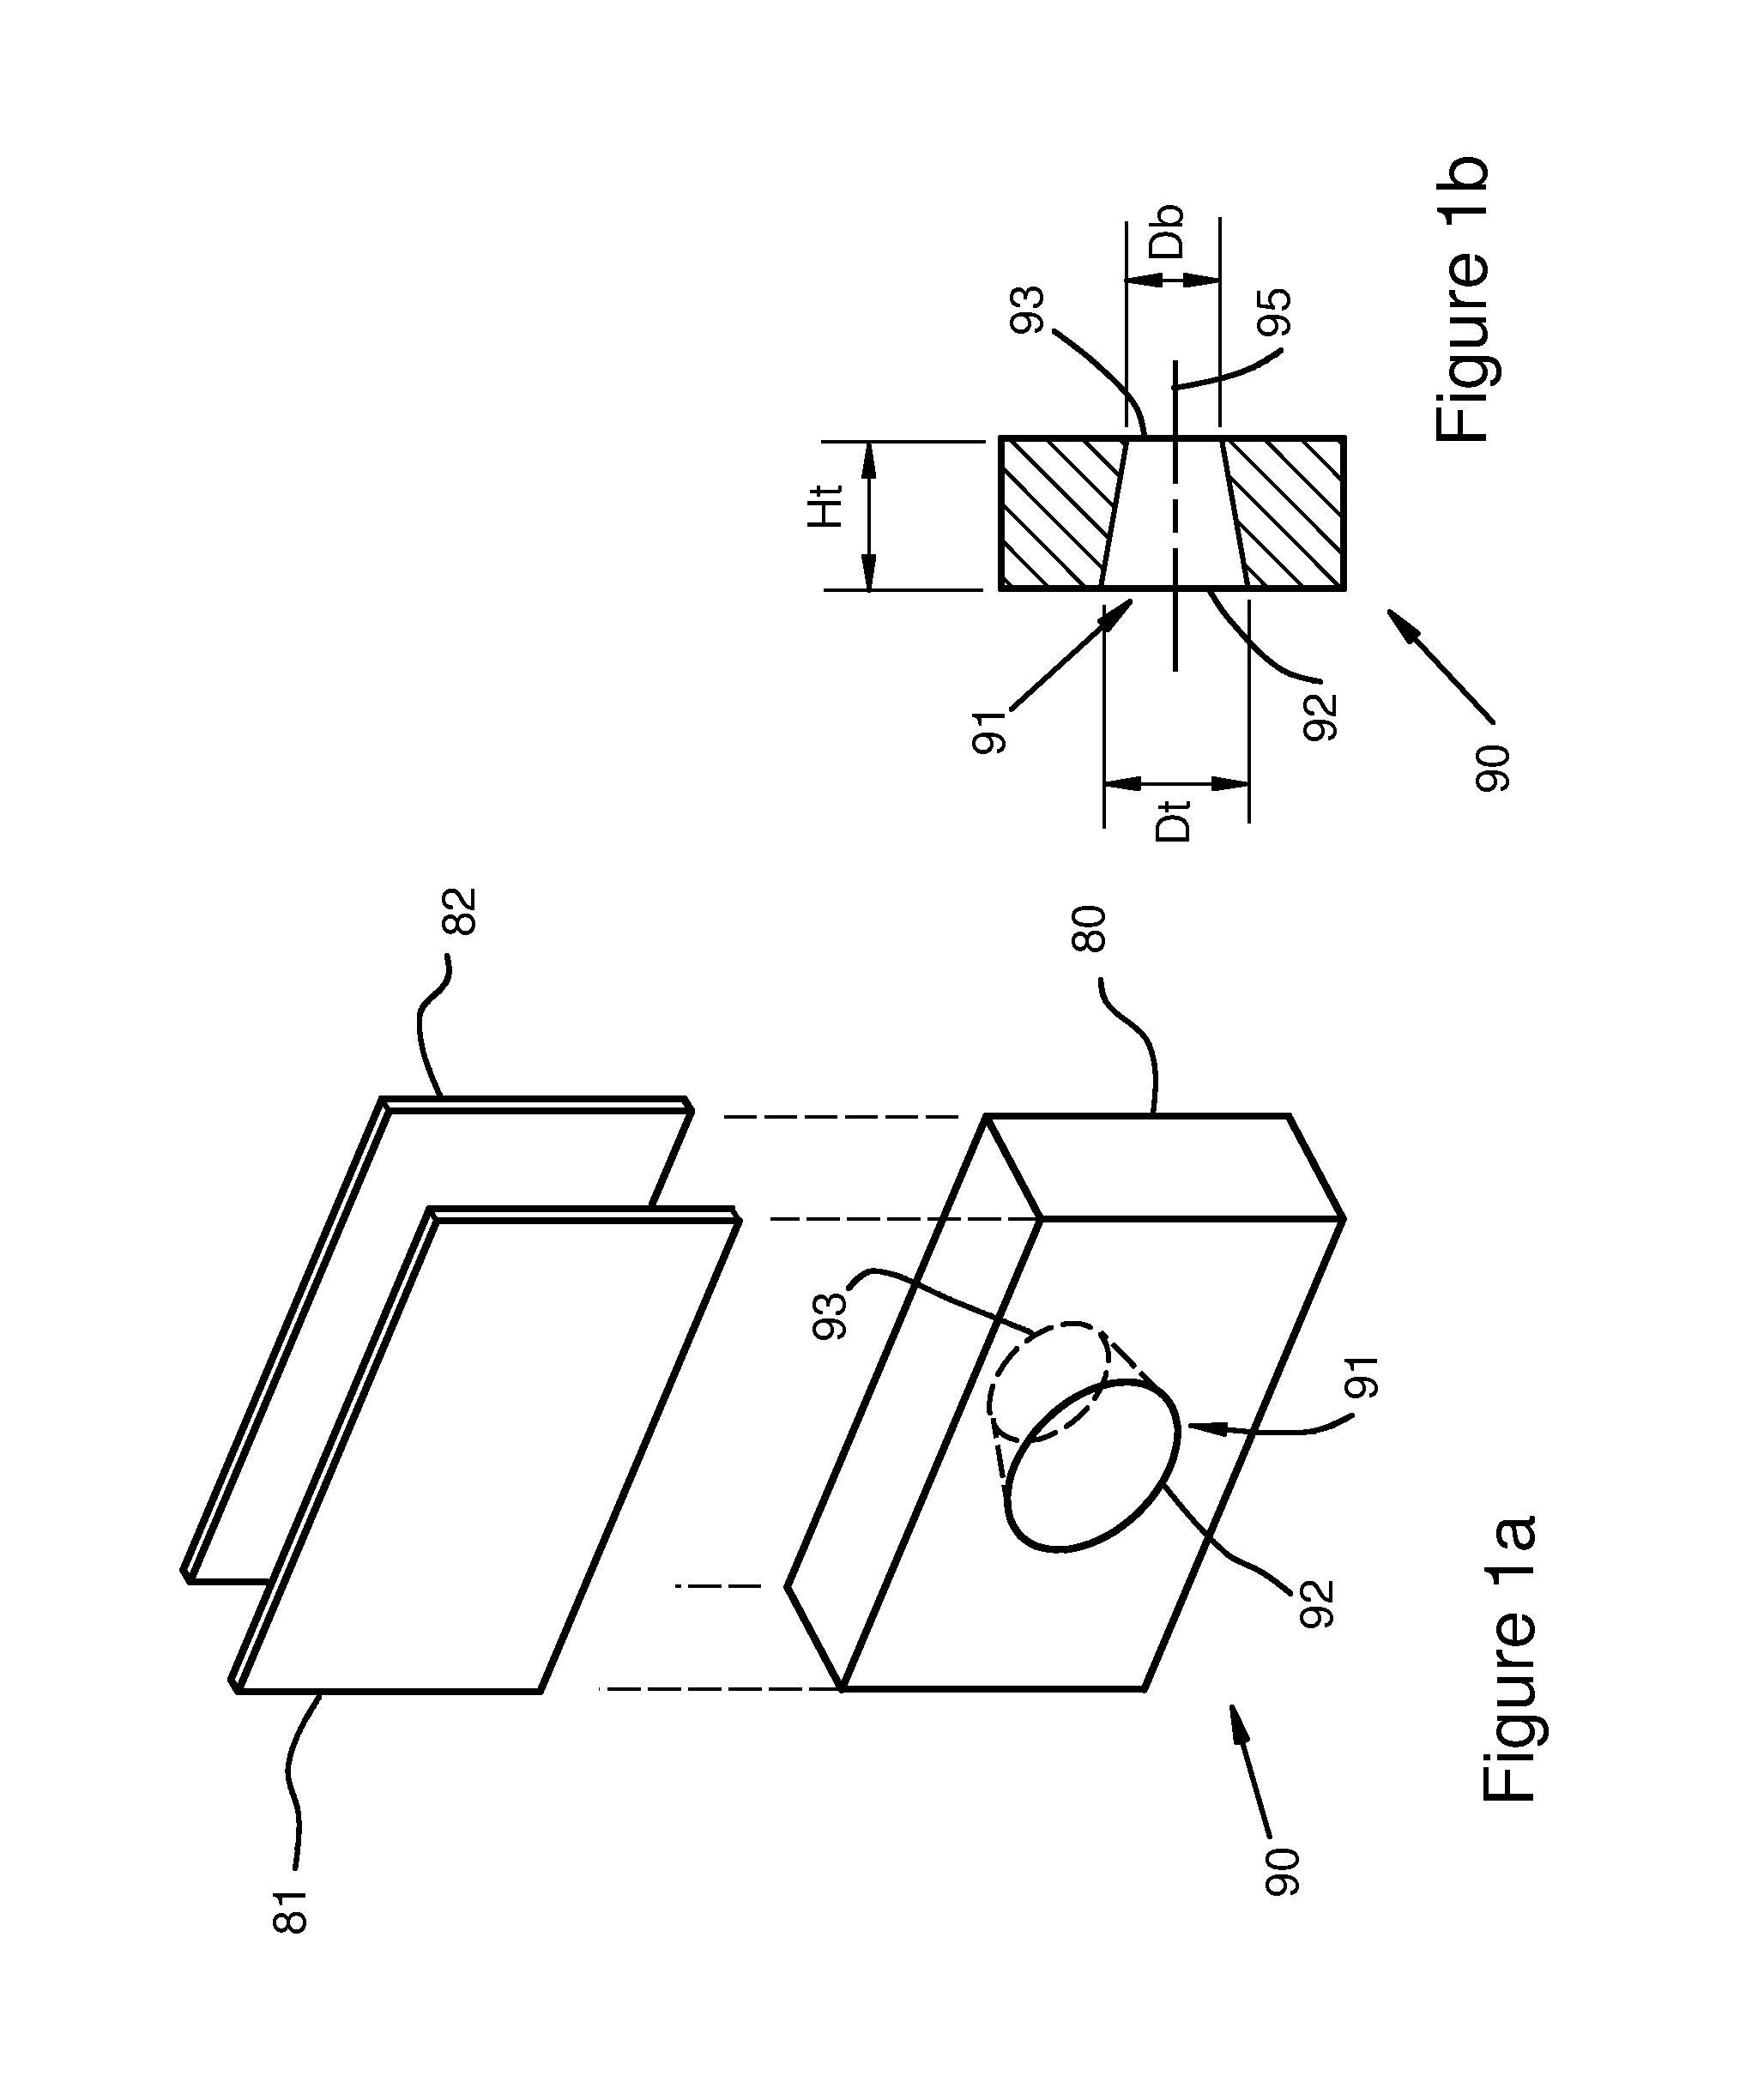 Device and method to measure bulk unconfined yield strength of powders using minimal material